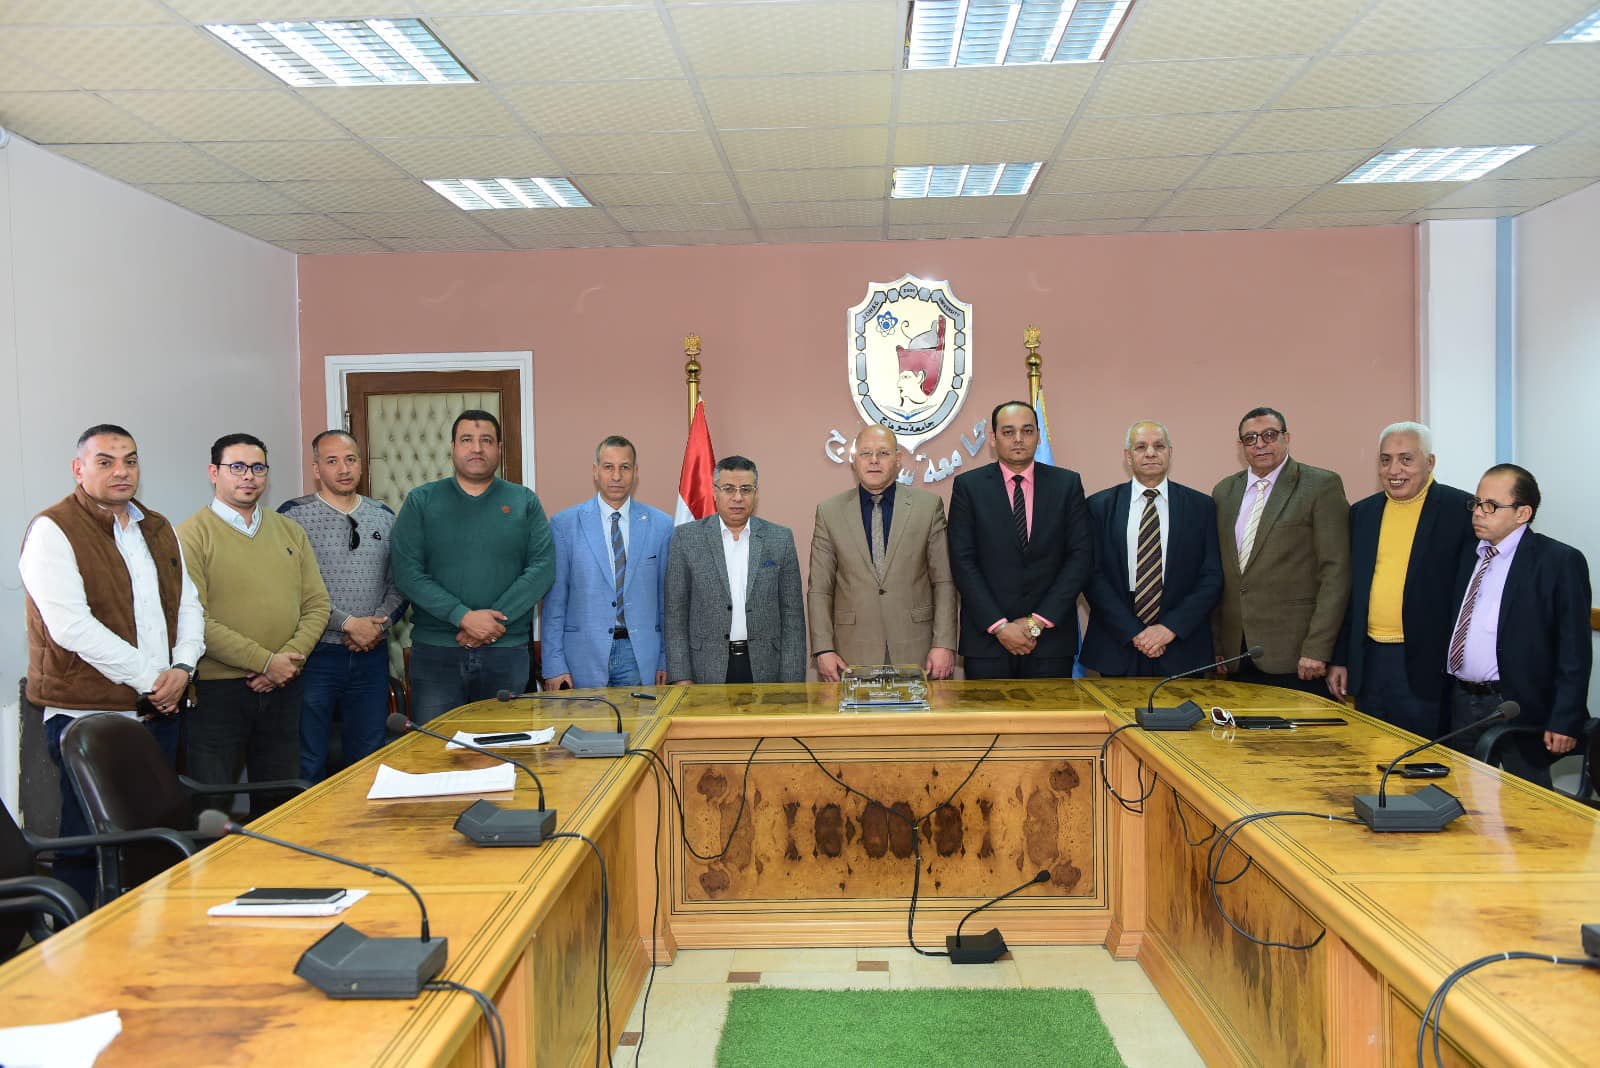 Sohag University President signs a Partnership Contract with a Cleaning